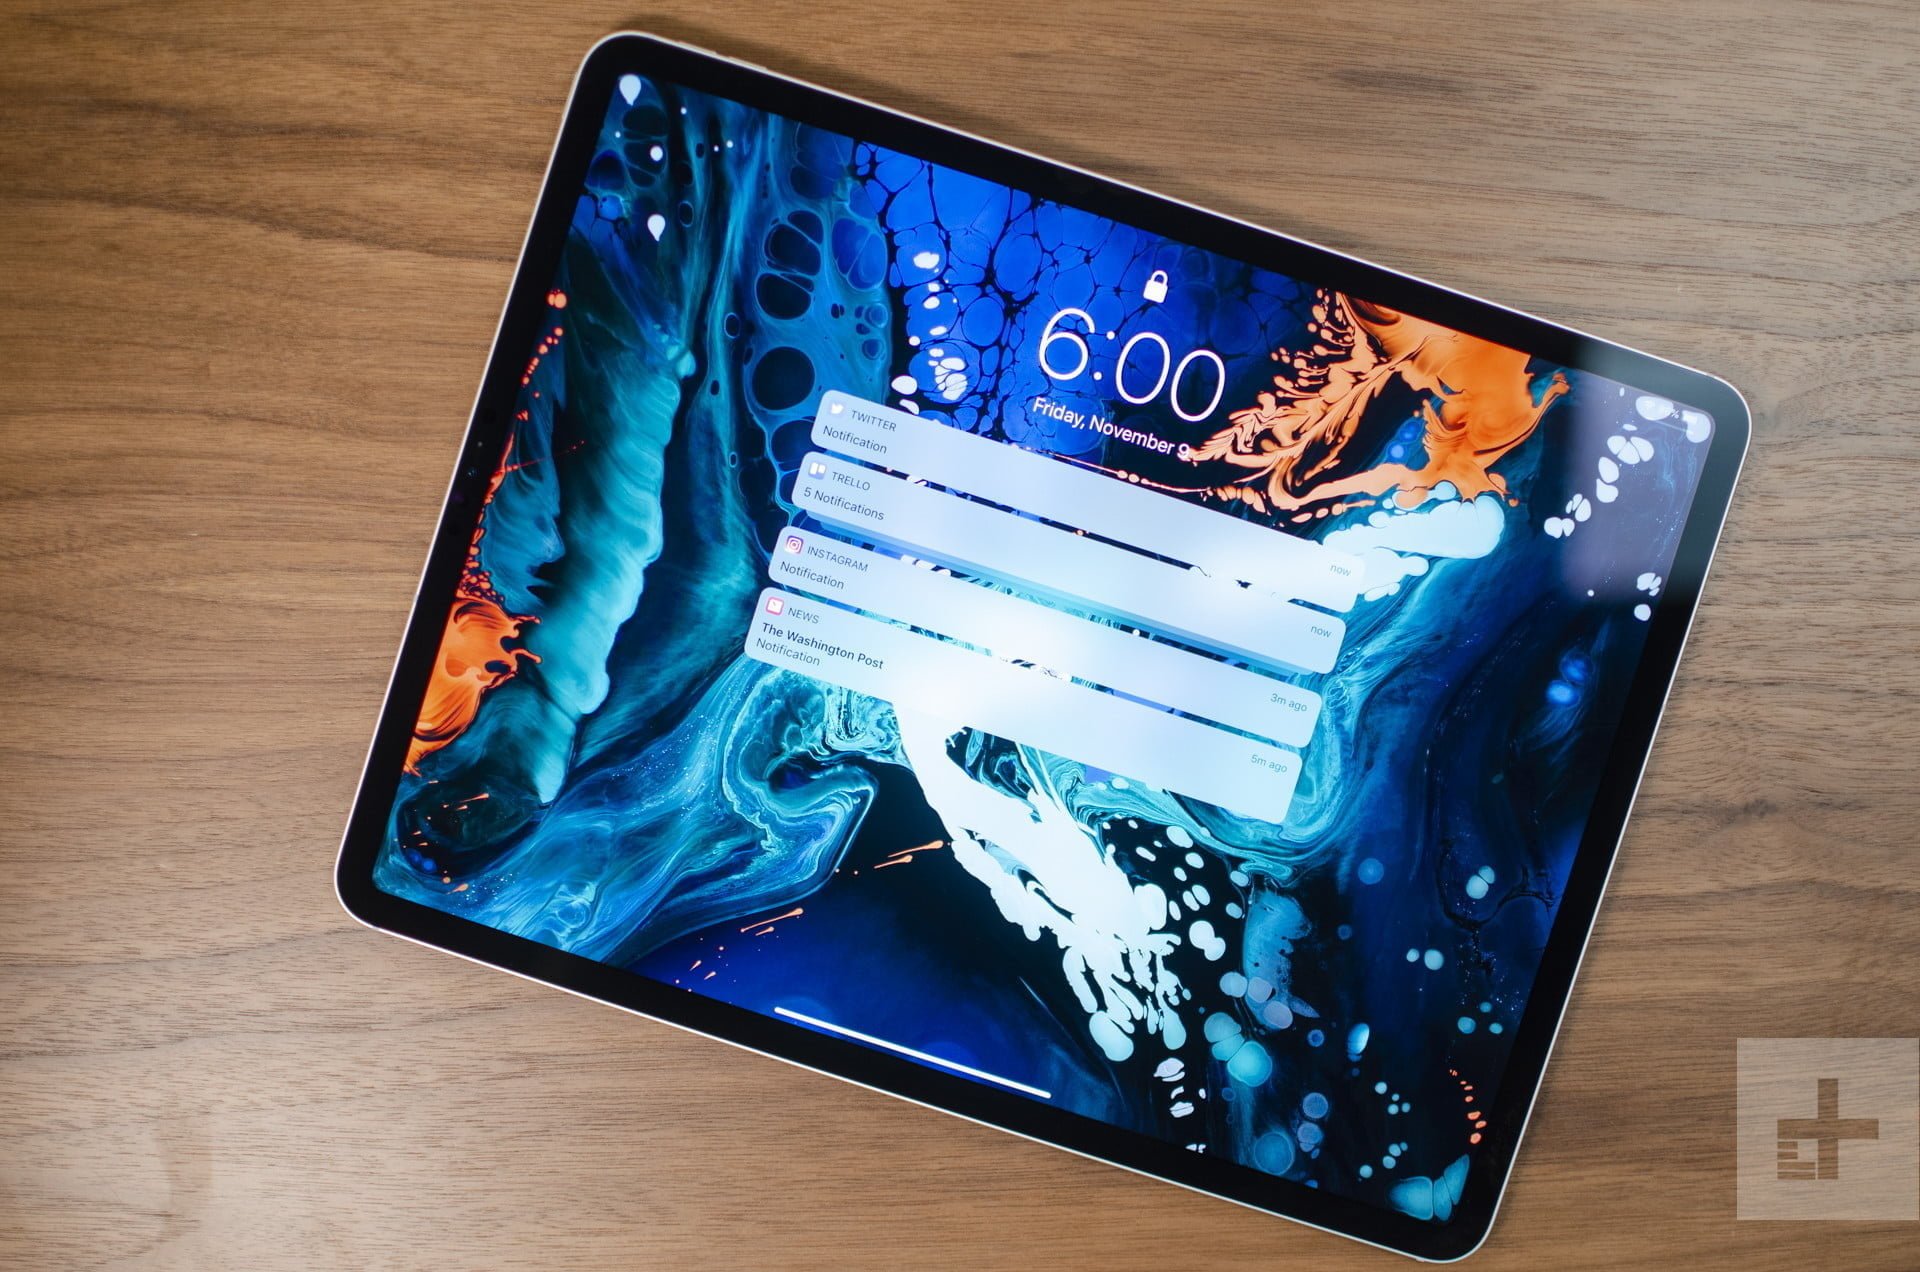 The best Black Friday iPad deals in 2019